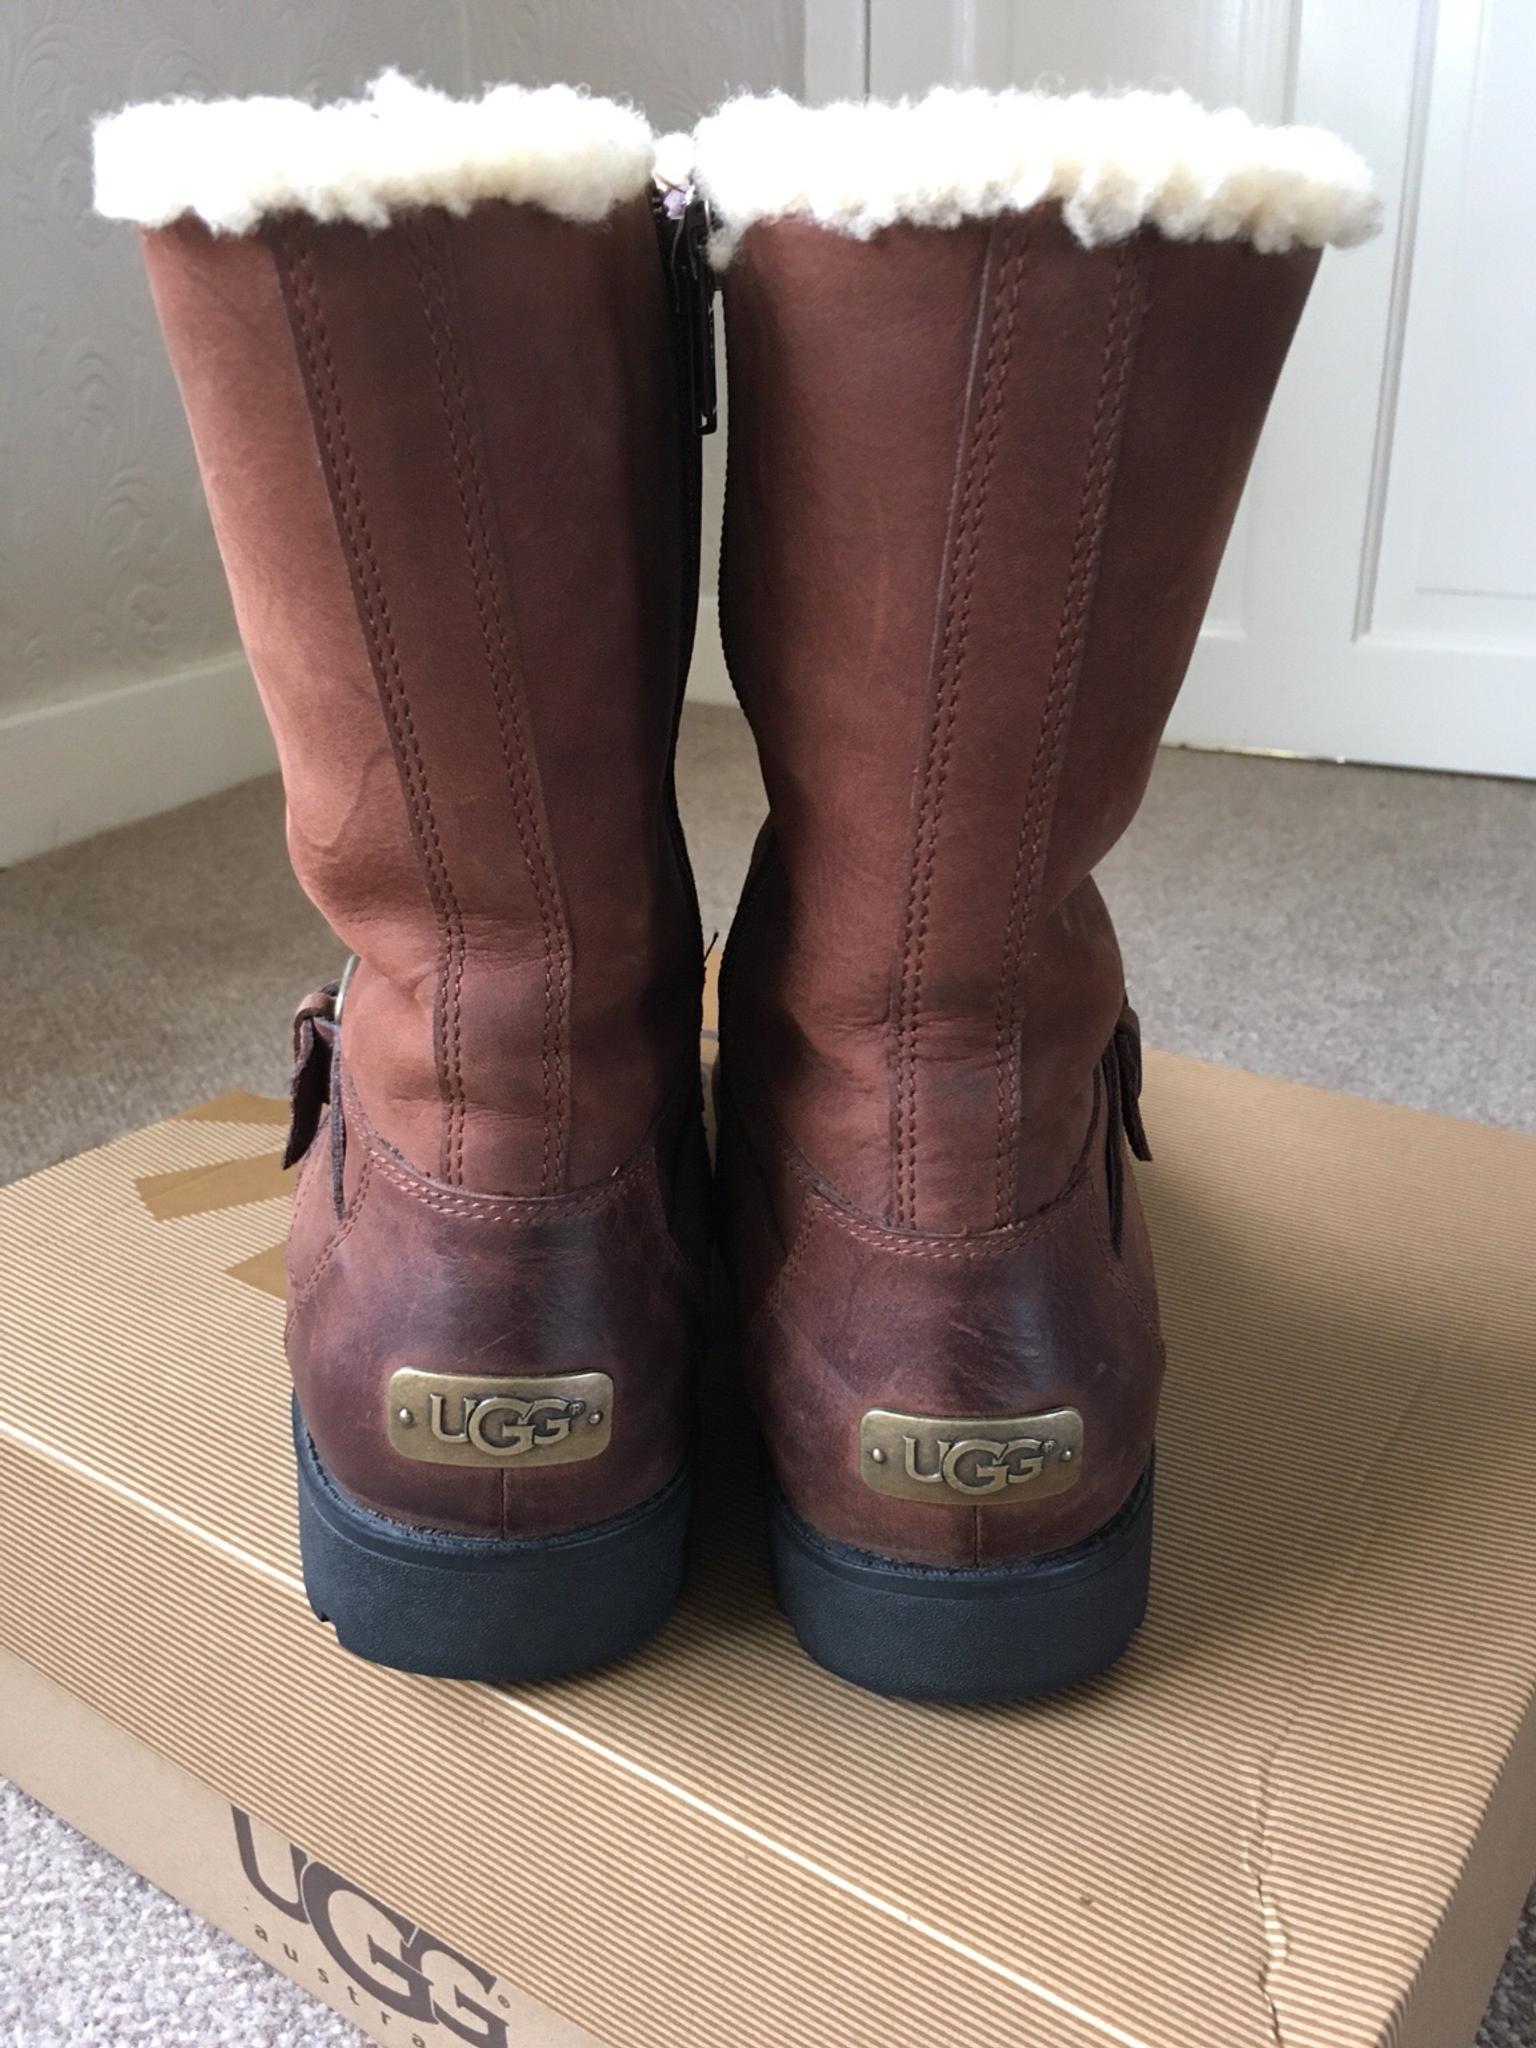 uggs size 7.5